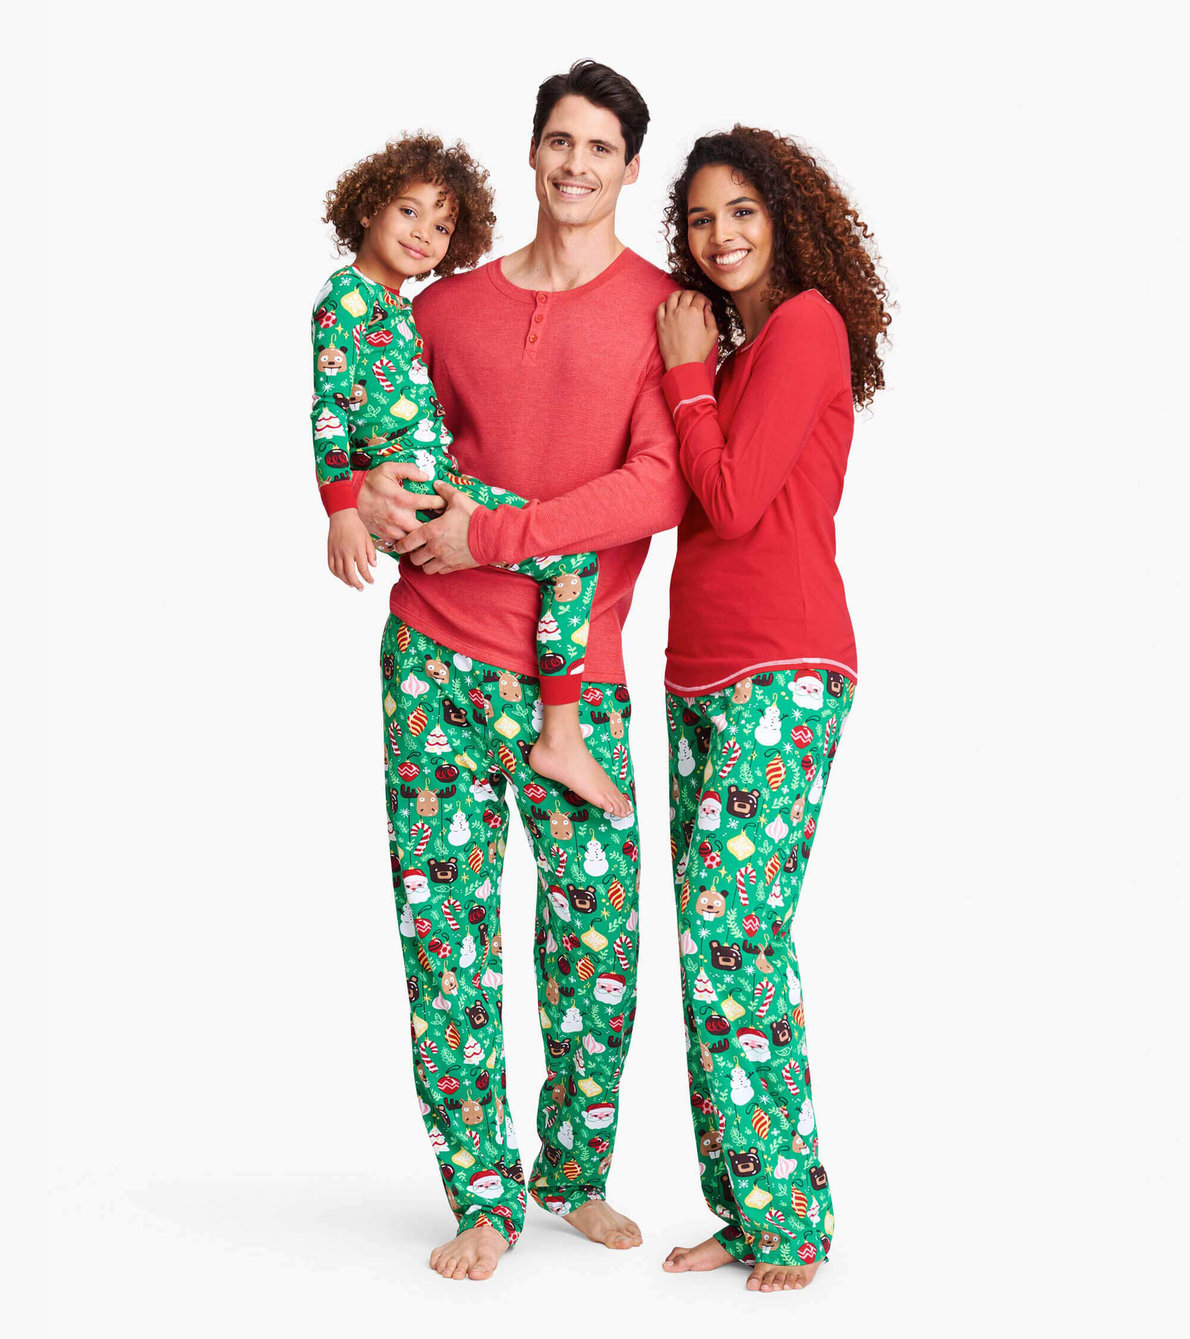 View larger image of Holiday Ornaments Women's Jersey Pajama Pants